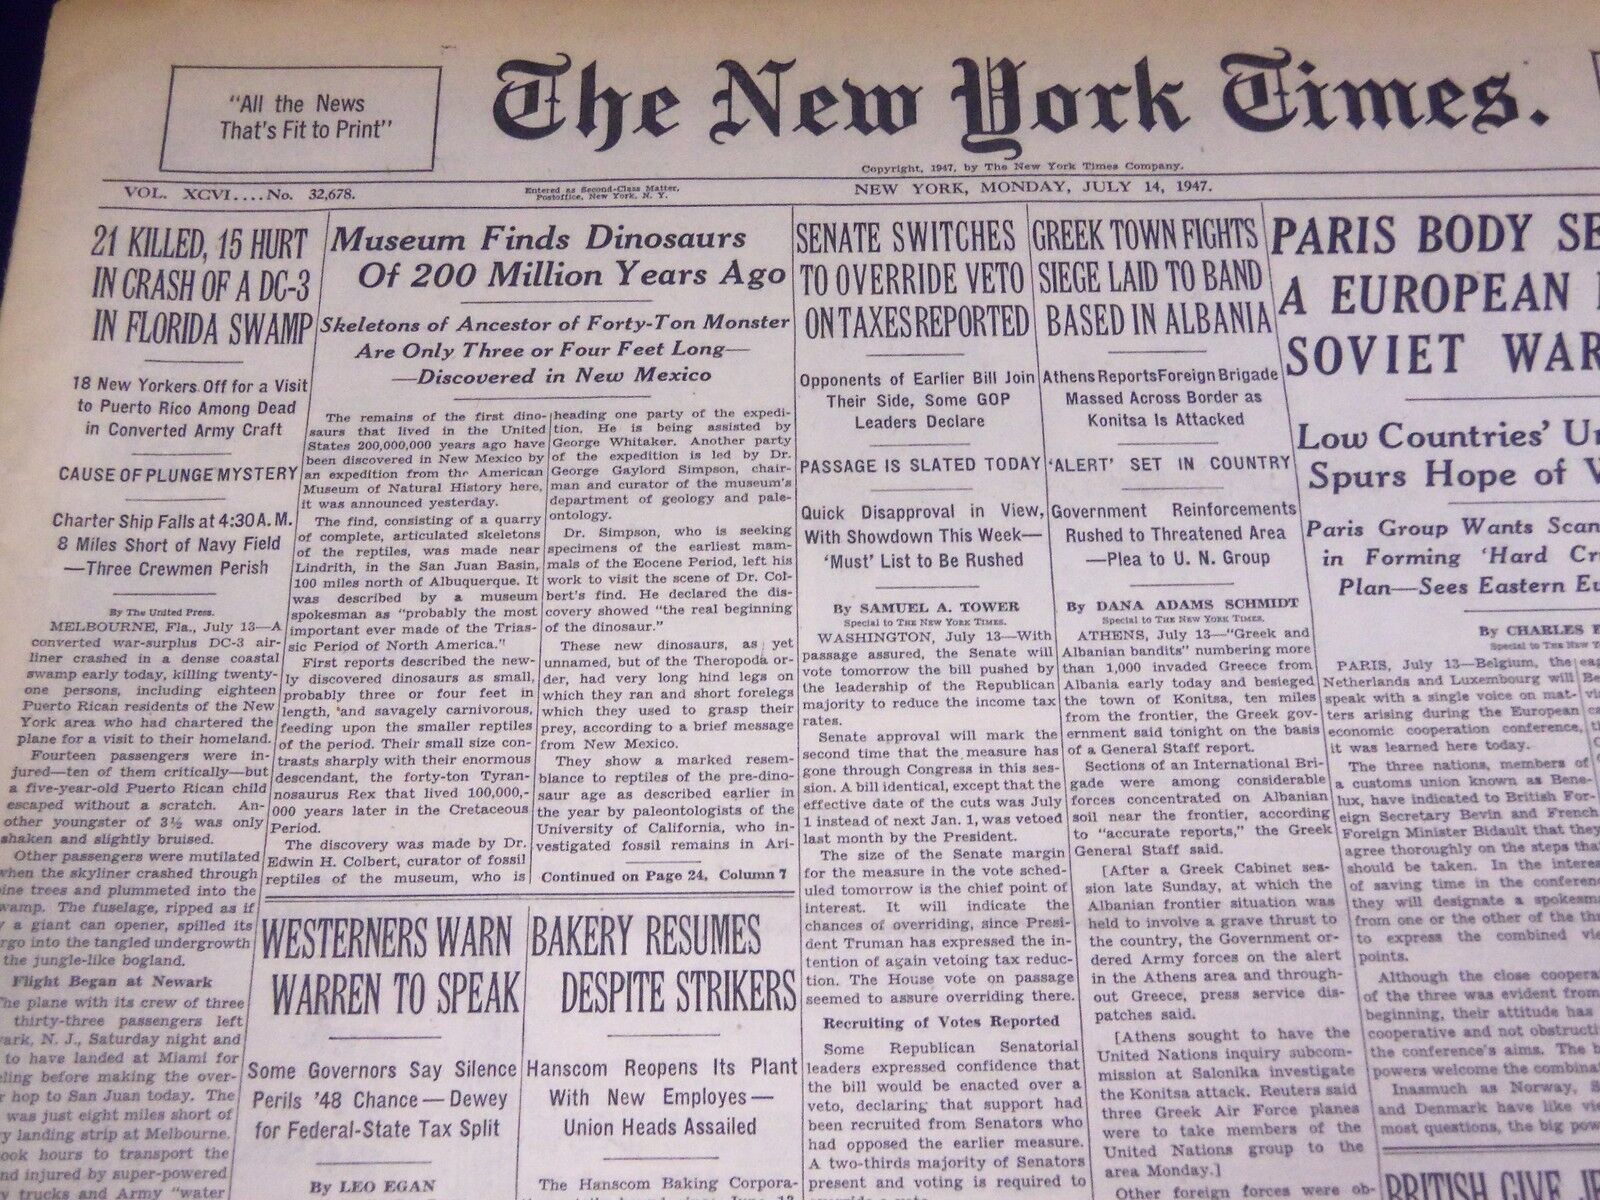 1947 JULY 14 NEW YORK TIMES - MUSEUM FINDS DINOSAURS 200 MILLION YEARS - NT 1410